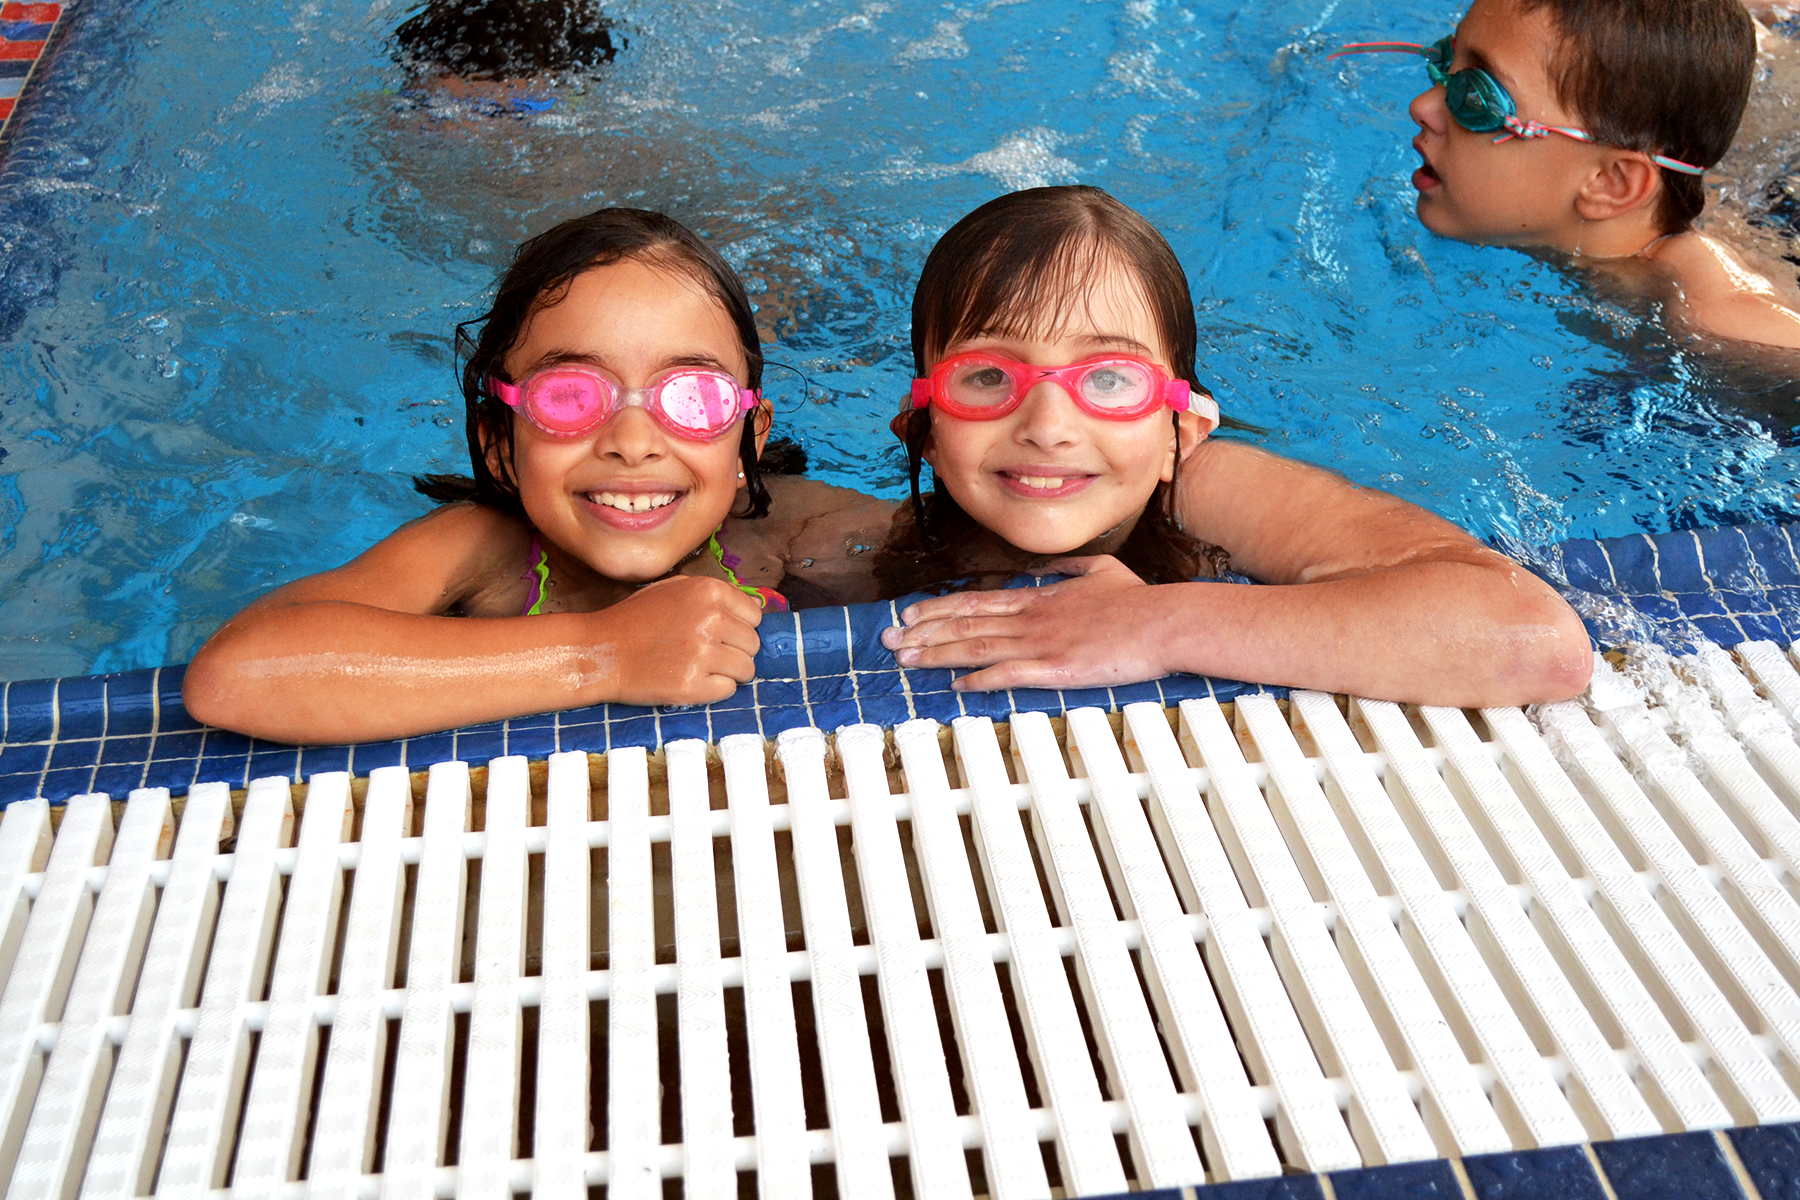 Two children in the pool smiling during their swim lesson.